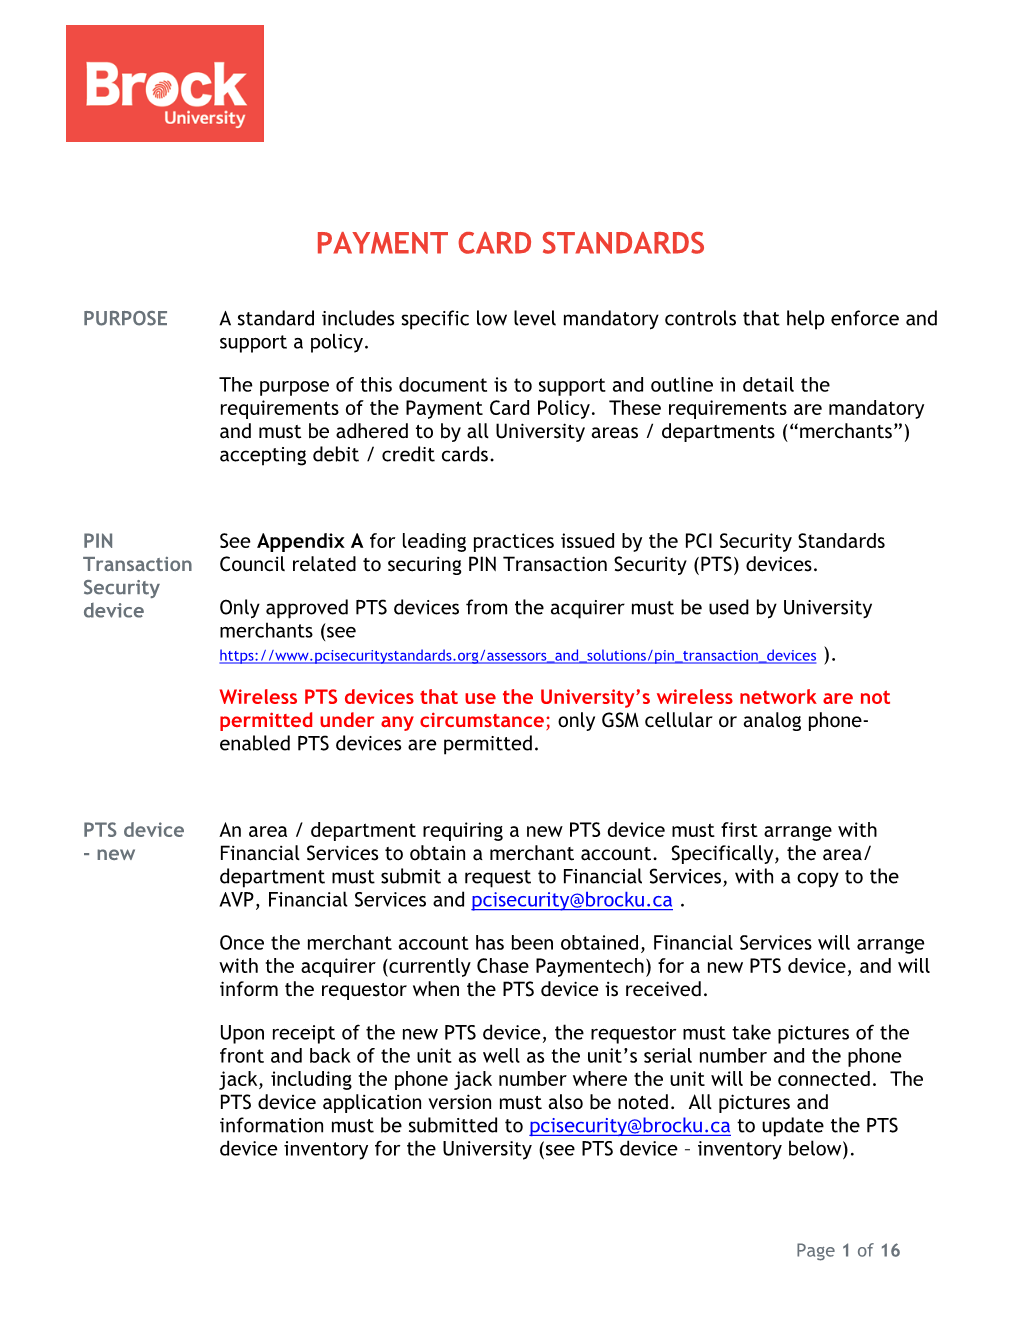 Payment Card Standards